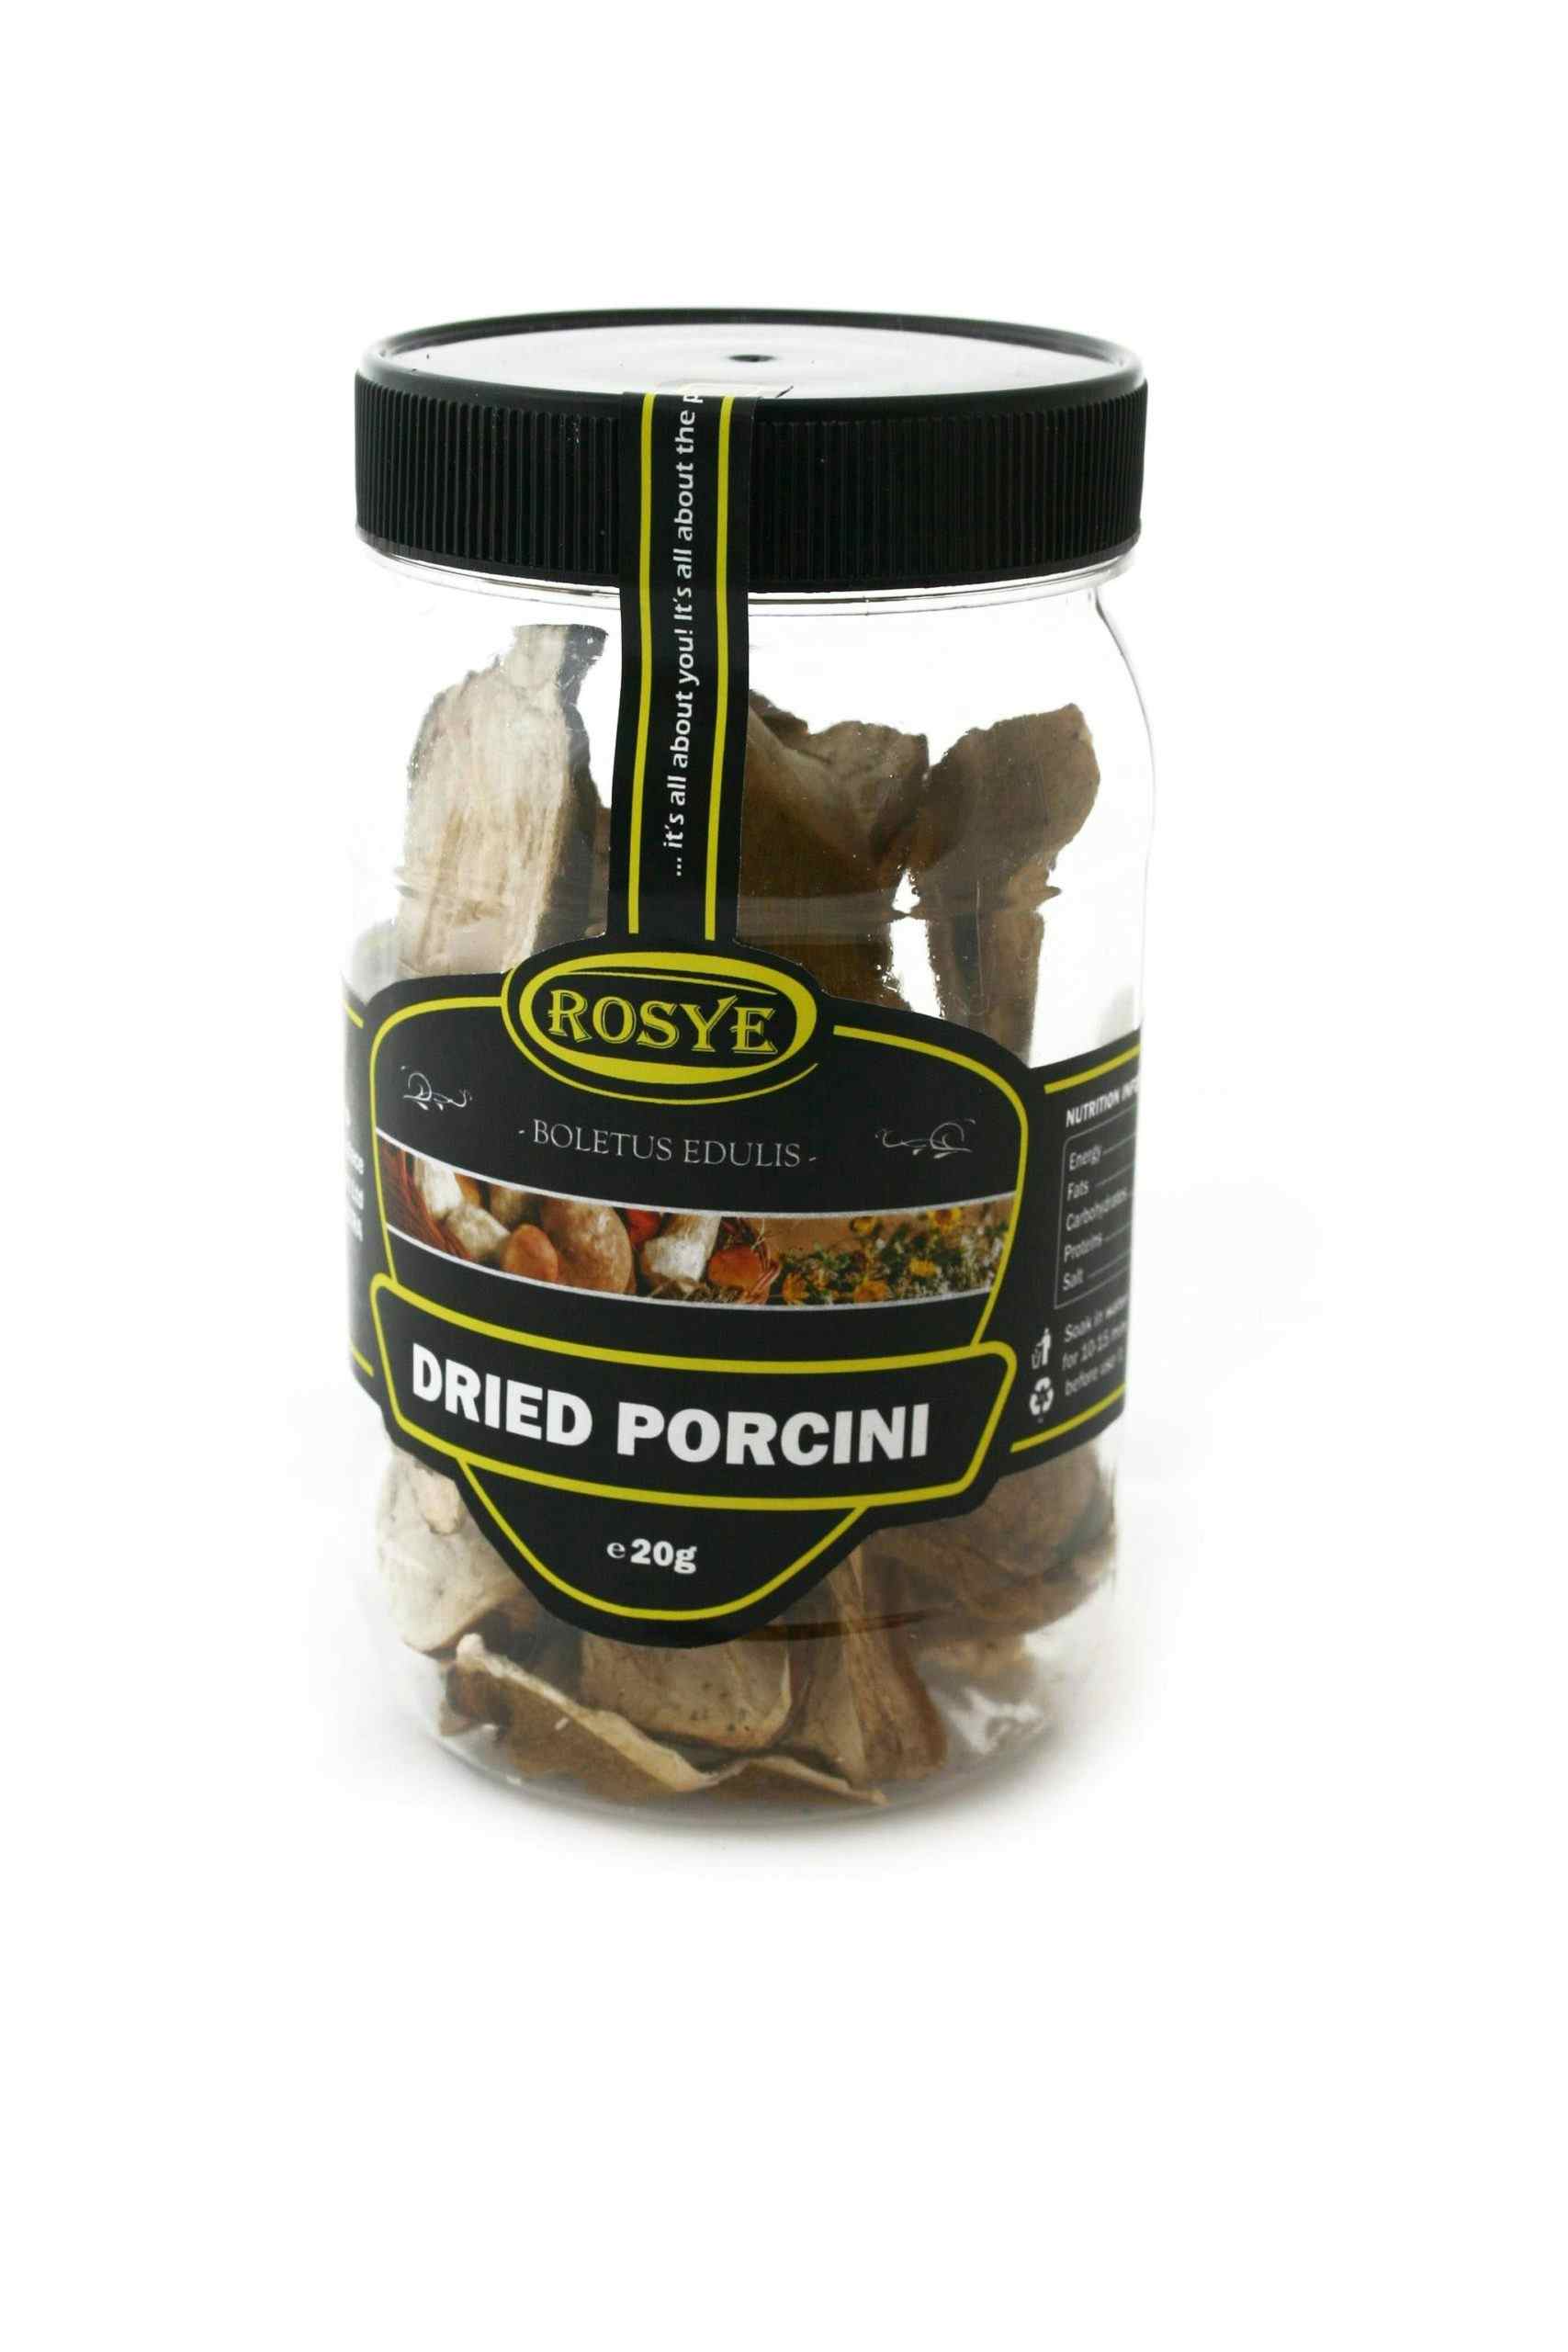 Dried Porcini (Boletus edulis), in retail packages with your own brand!